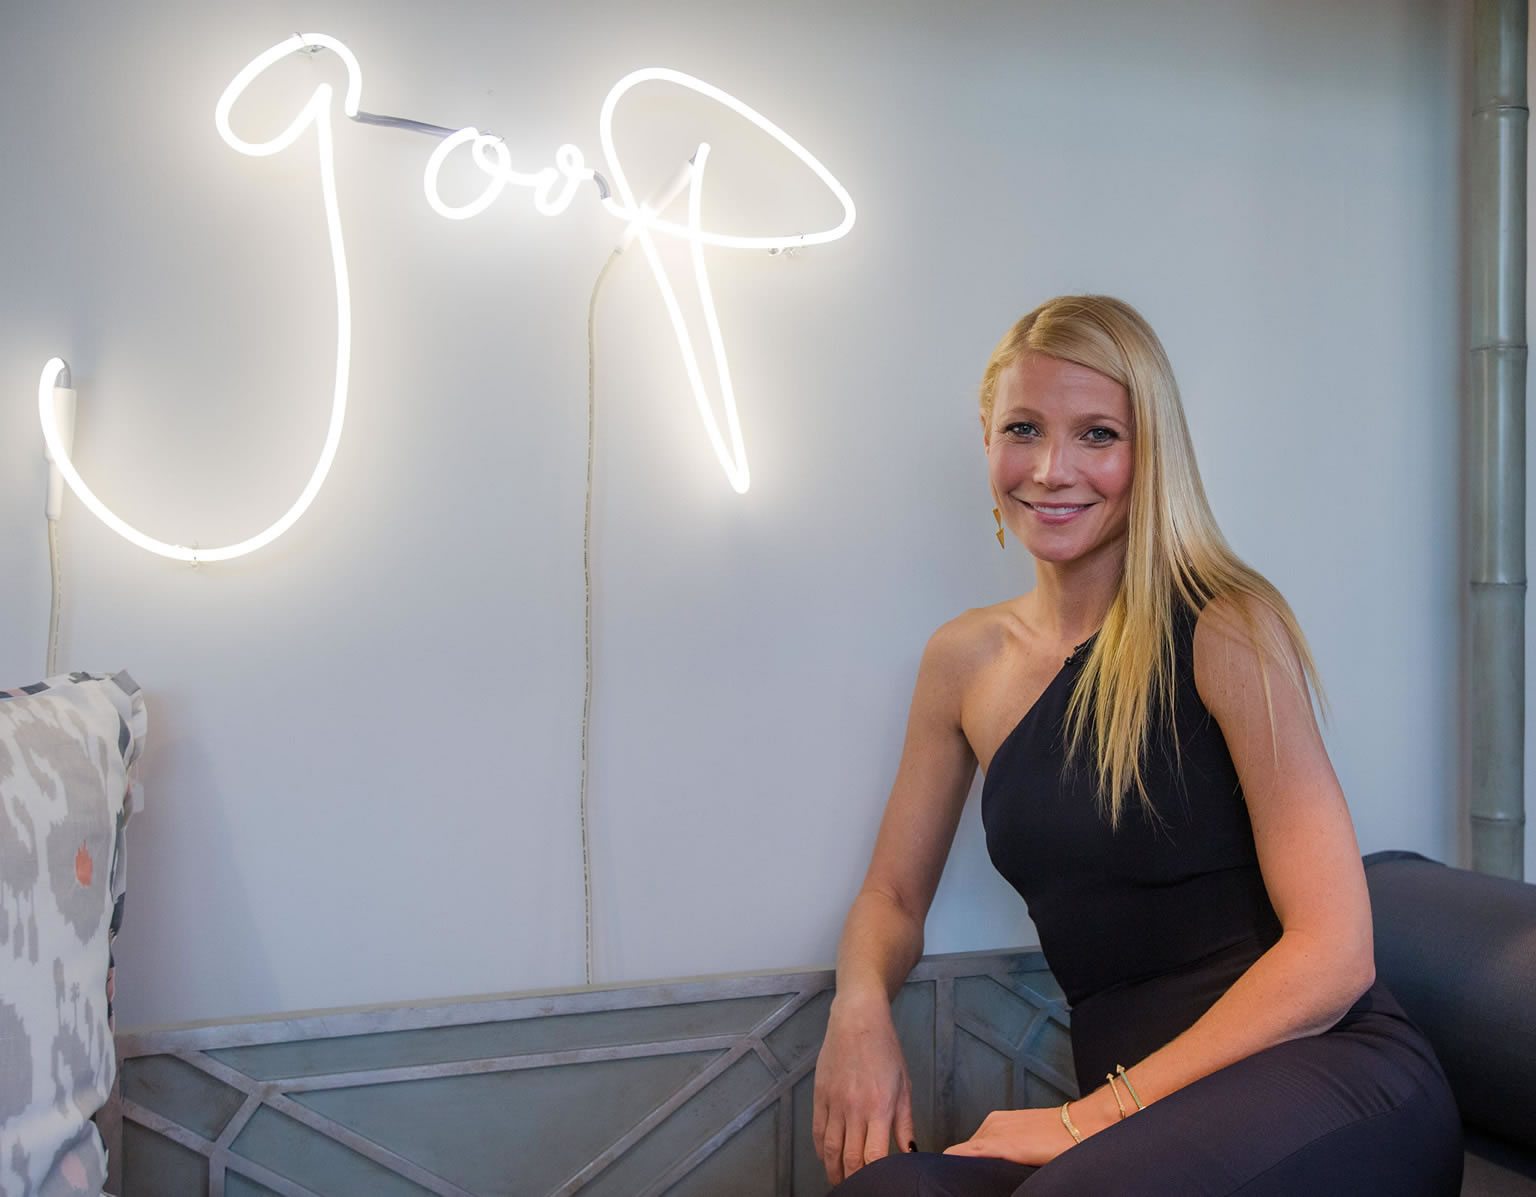 Gwyneth Paltrow posing proudly in front of a neon goop logo. Somehow this seems appropriate.